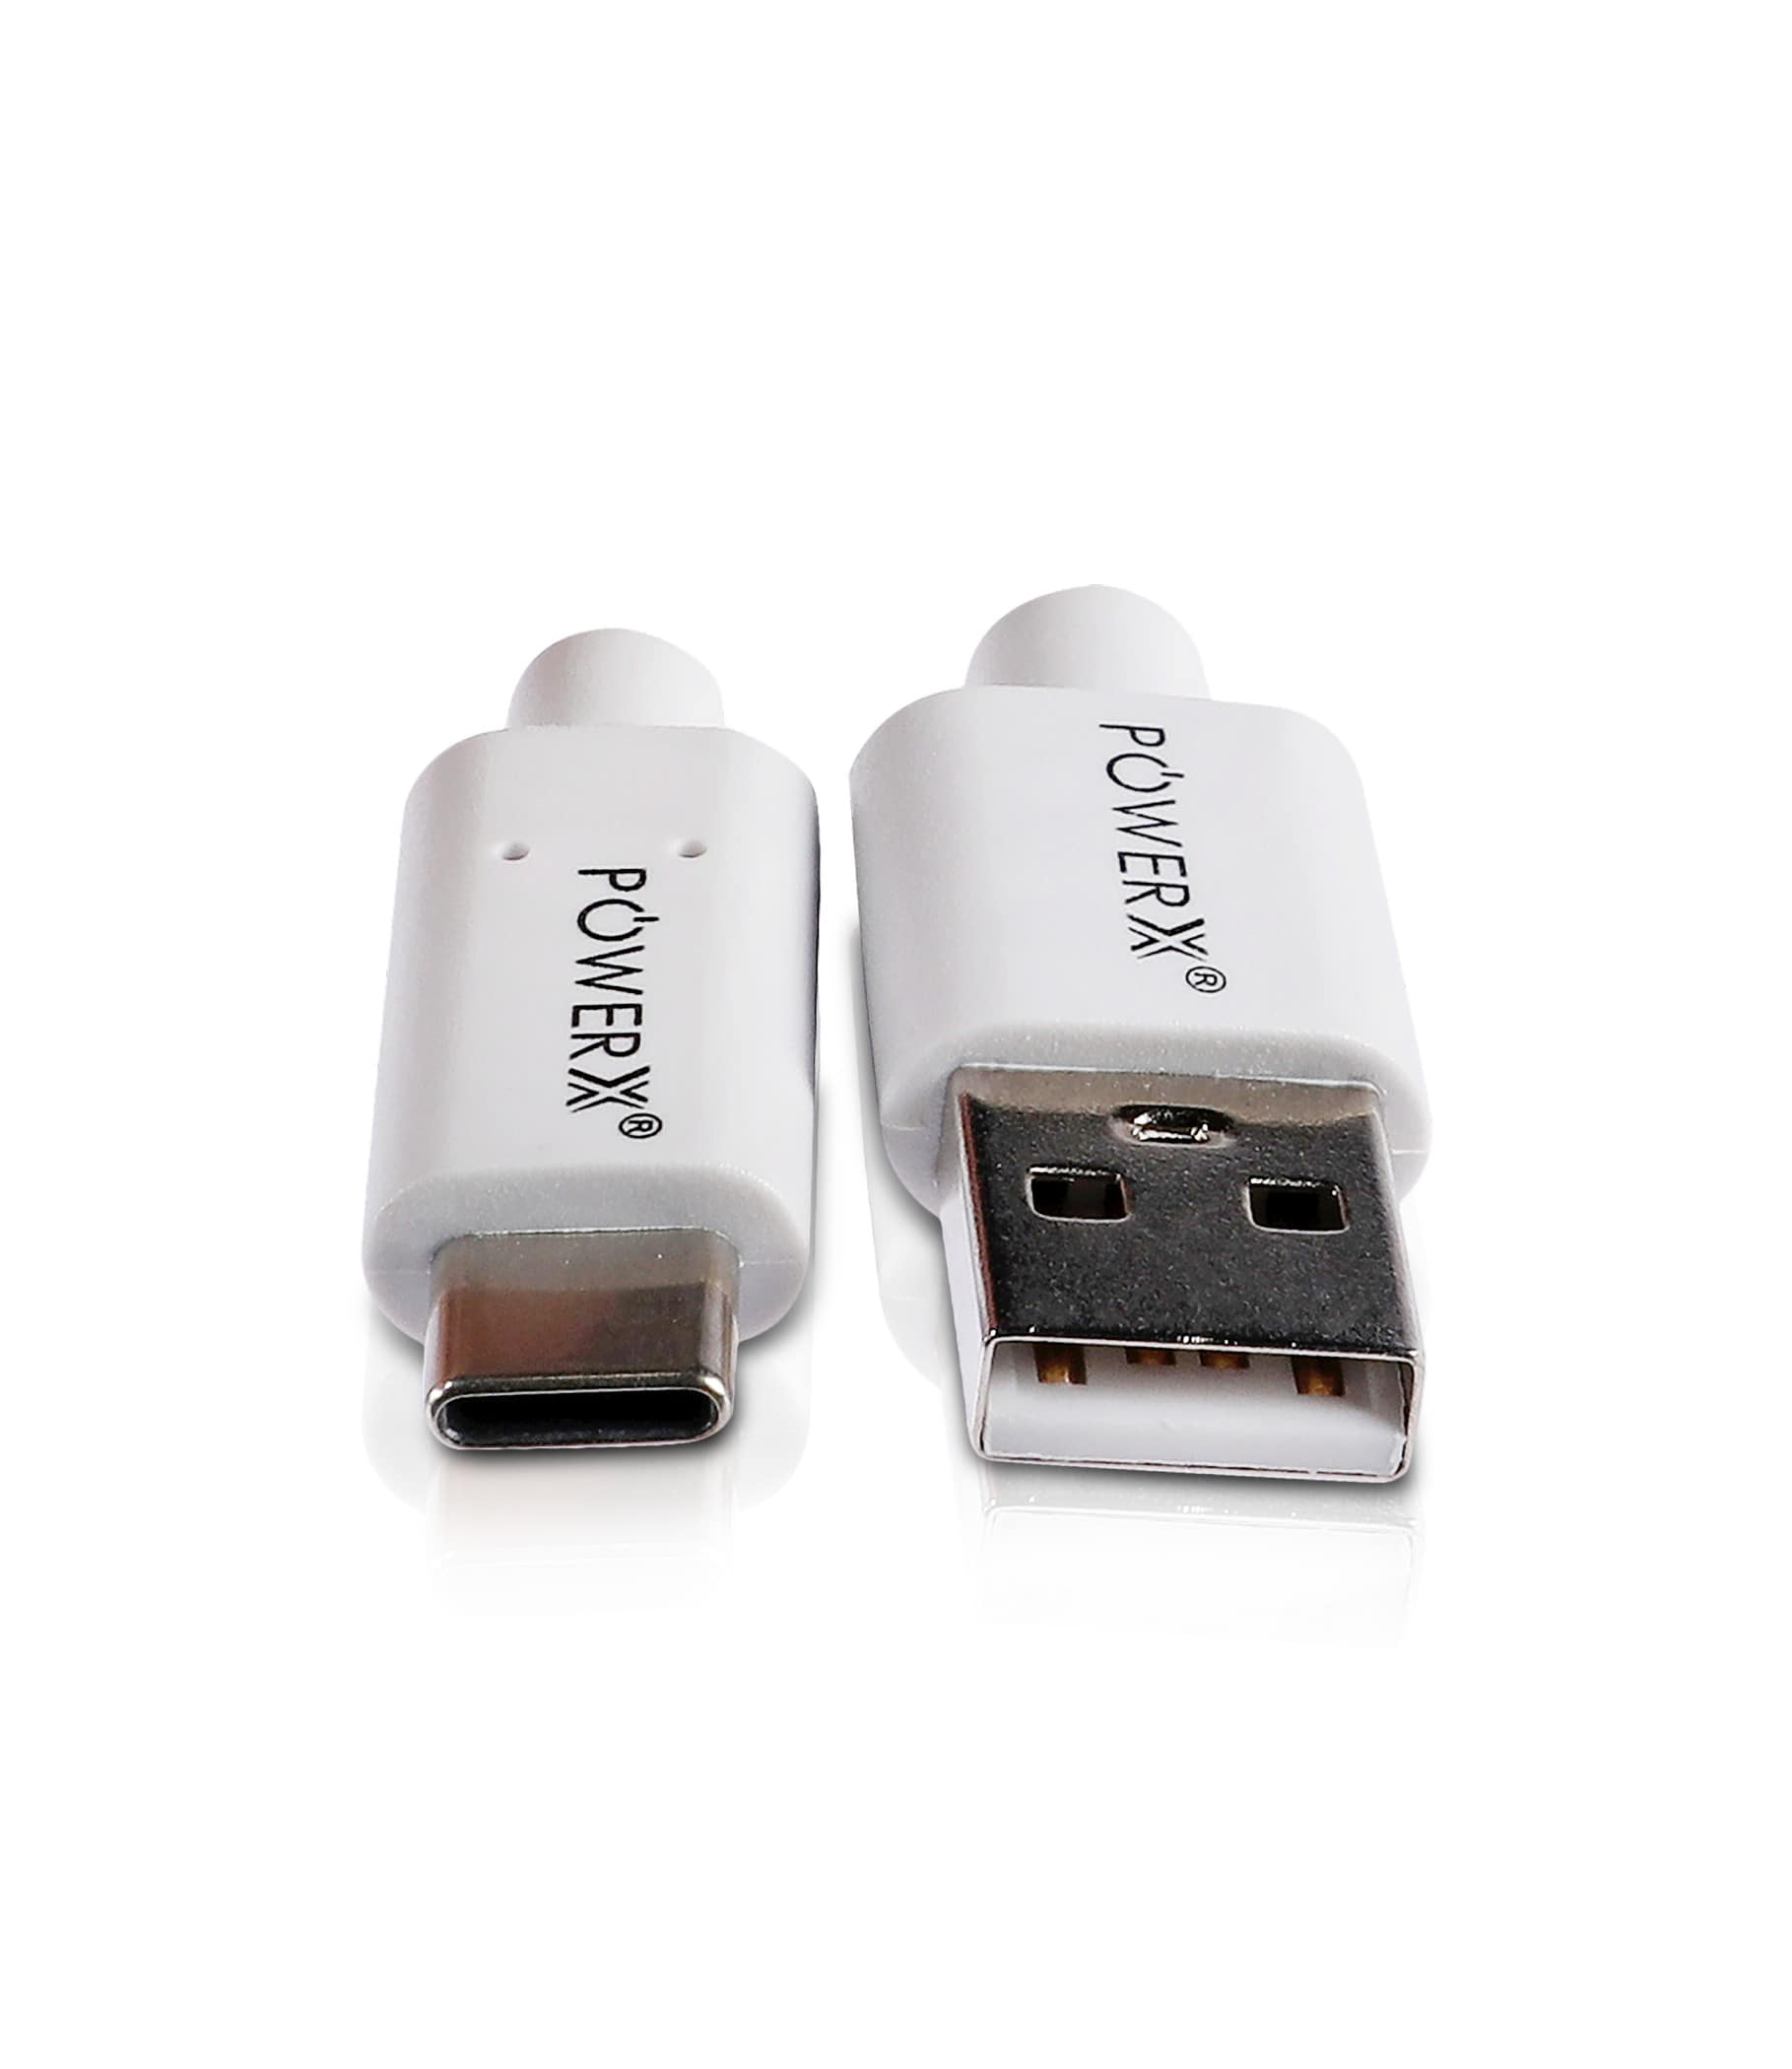 POWERX C TO USB PORT, C MALE TO USB FEMALE CONNECTOR